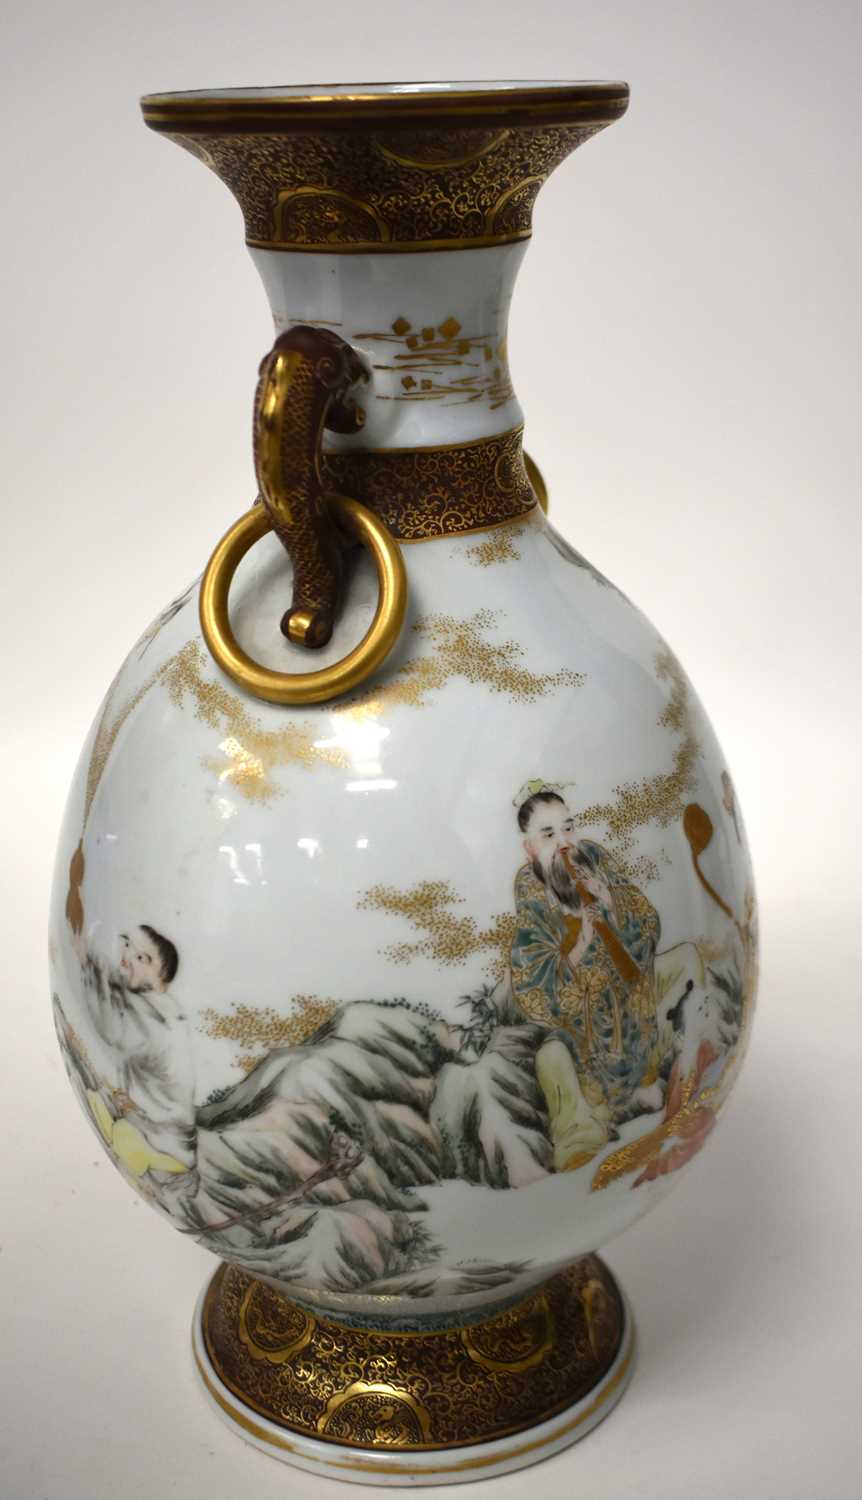 A LARGE 19TH CENTURY JAPANESE MEIJI PERIOD TWIN HANDLED KUTANI PORCELAIN VASE painted with figures - Image 10 of 21